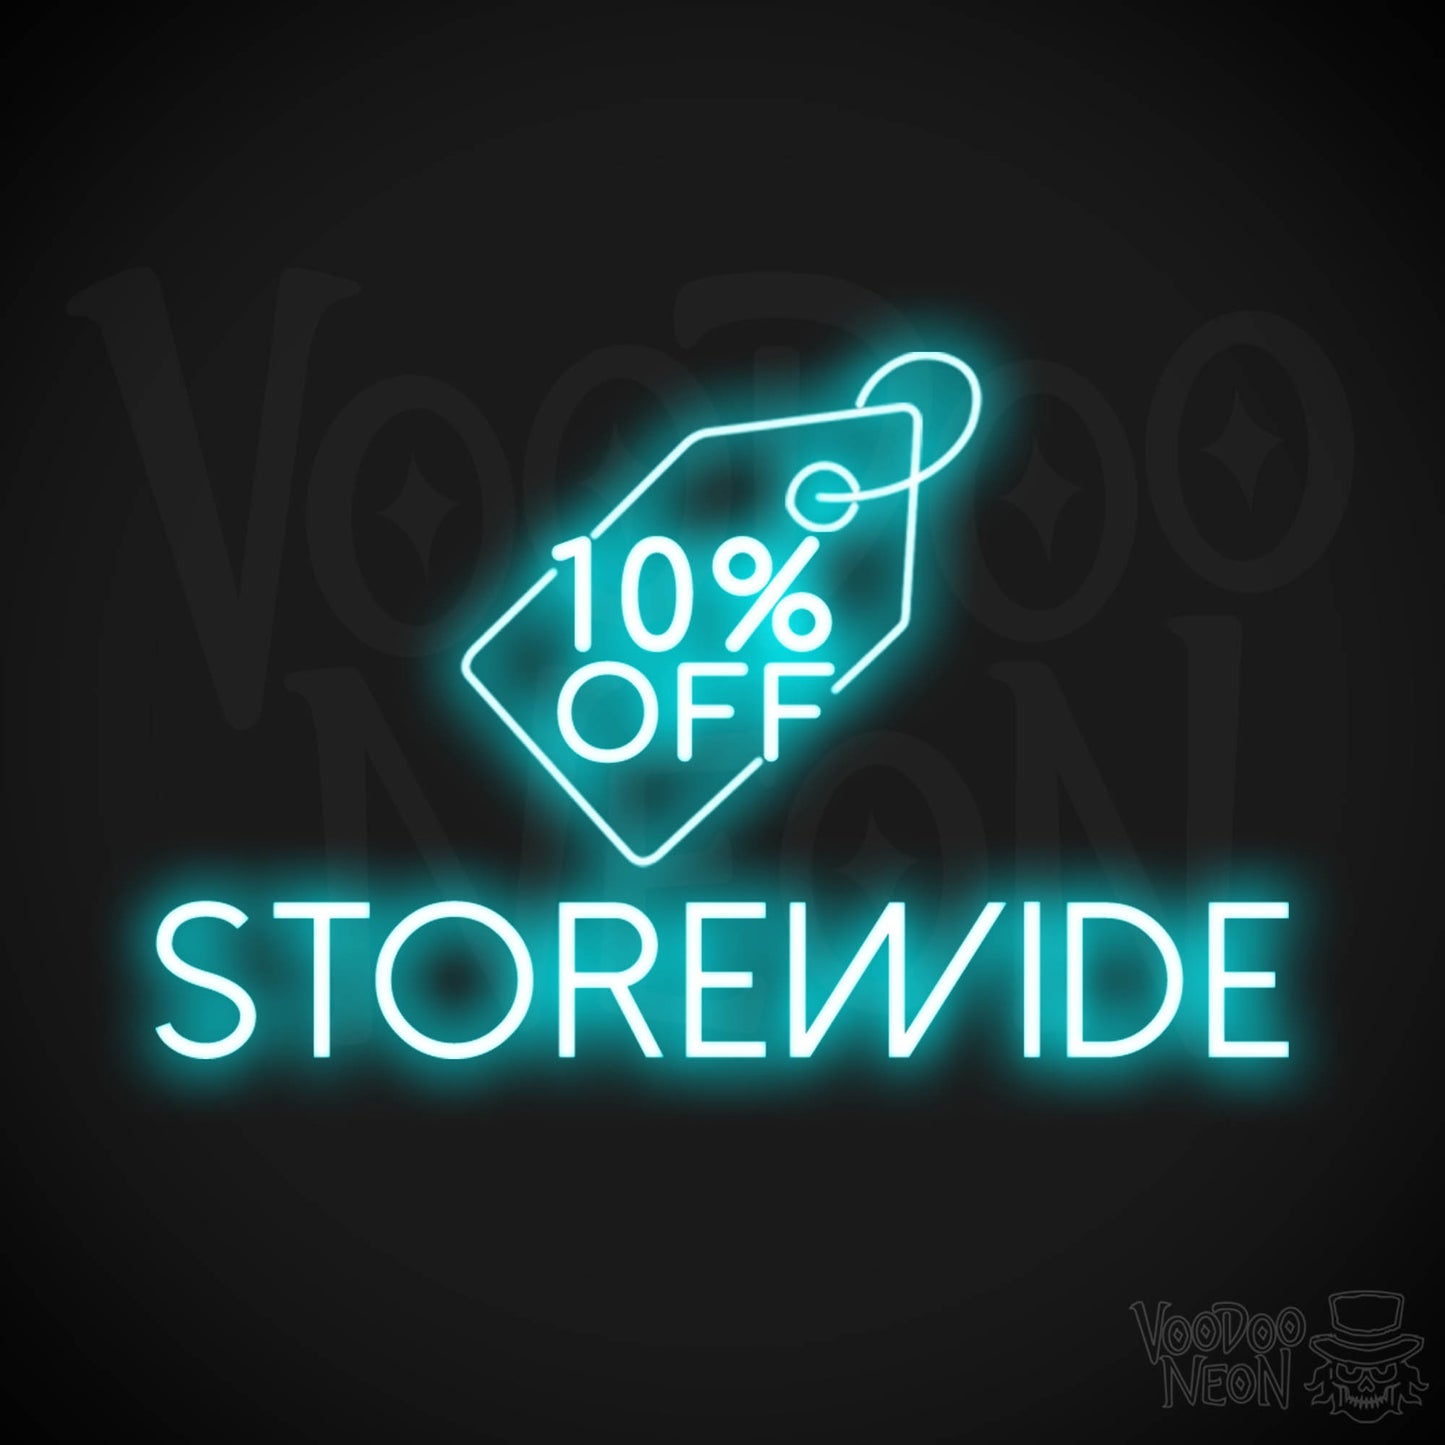 10% Off Storewide Neon Sign - 10% Off Storewide Sign - Neon Shop Signs - Color Ice Blue